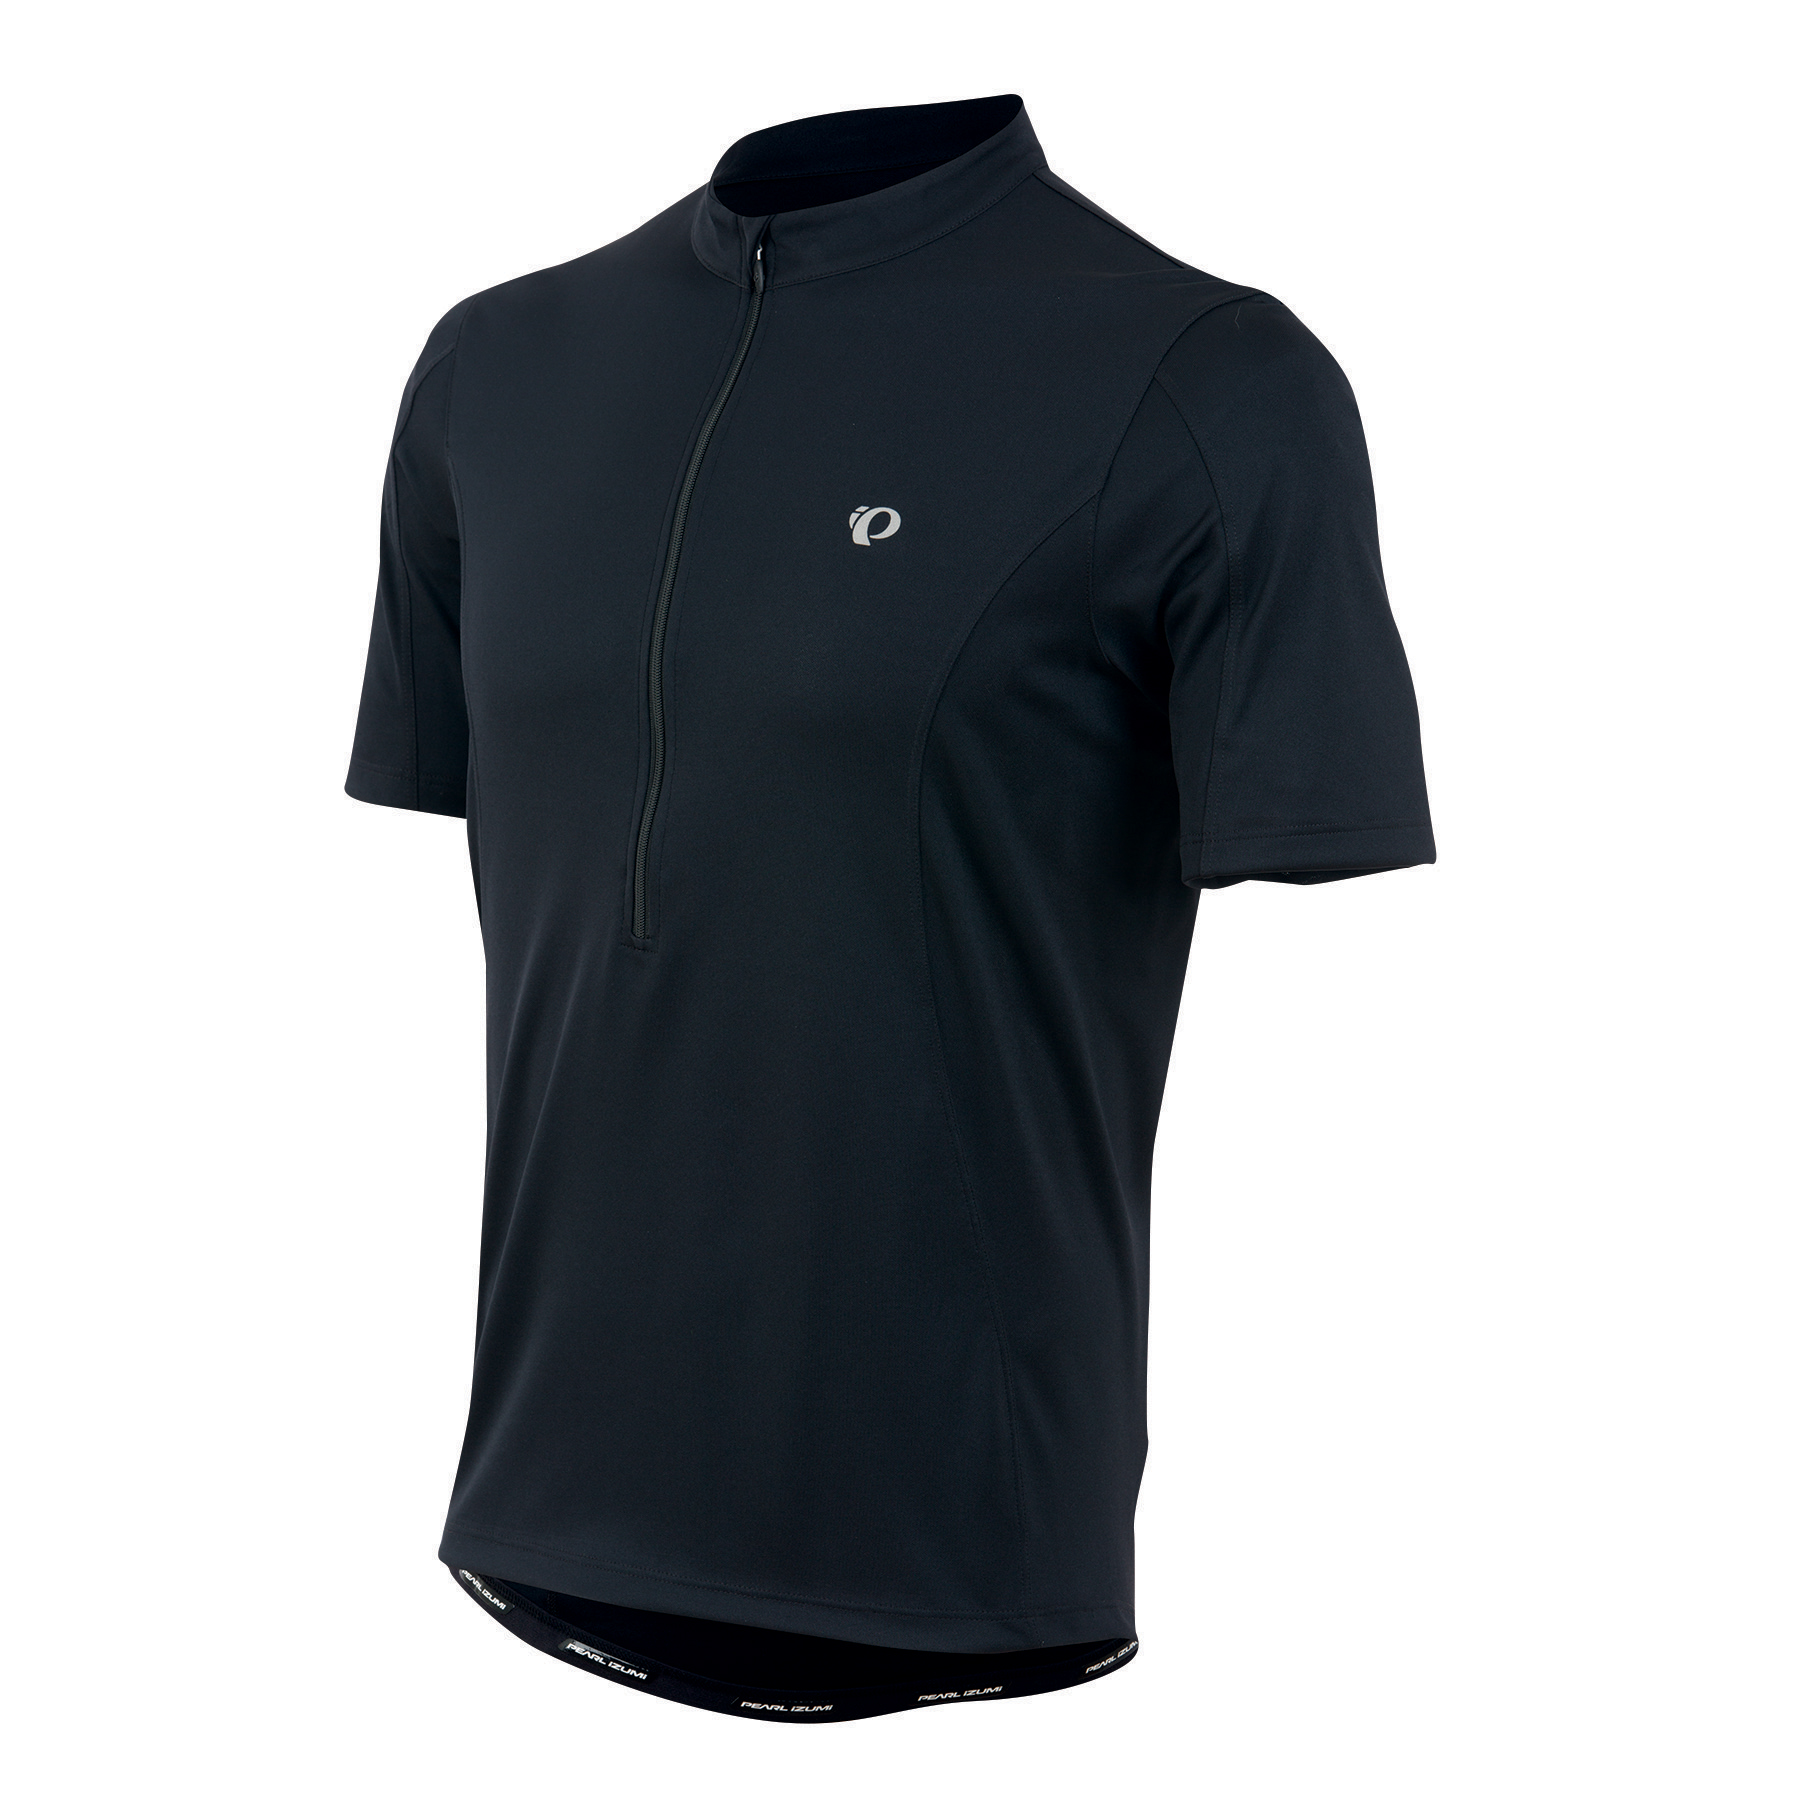 pearl izumi relaxed fit jersey